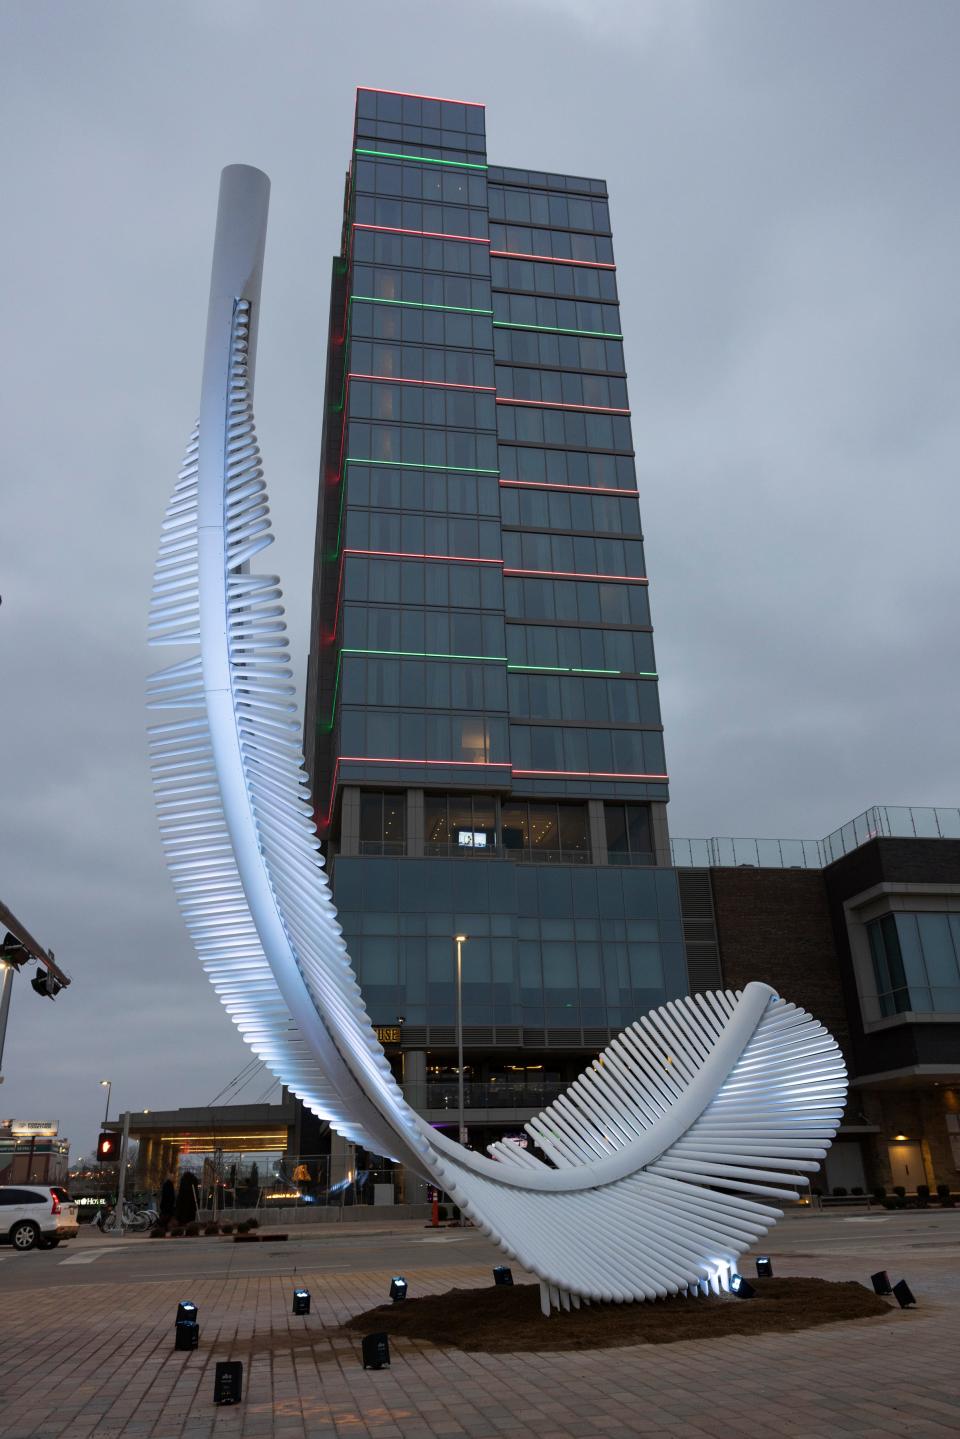 The new "Light as a Feather" sculpture, dedicated to late  city arts liaison Robbie Kienzle, is lit Wednesday, Dec. 21, 2022, at Scissortail Park. in Oklahoma City.